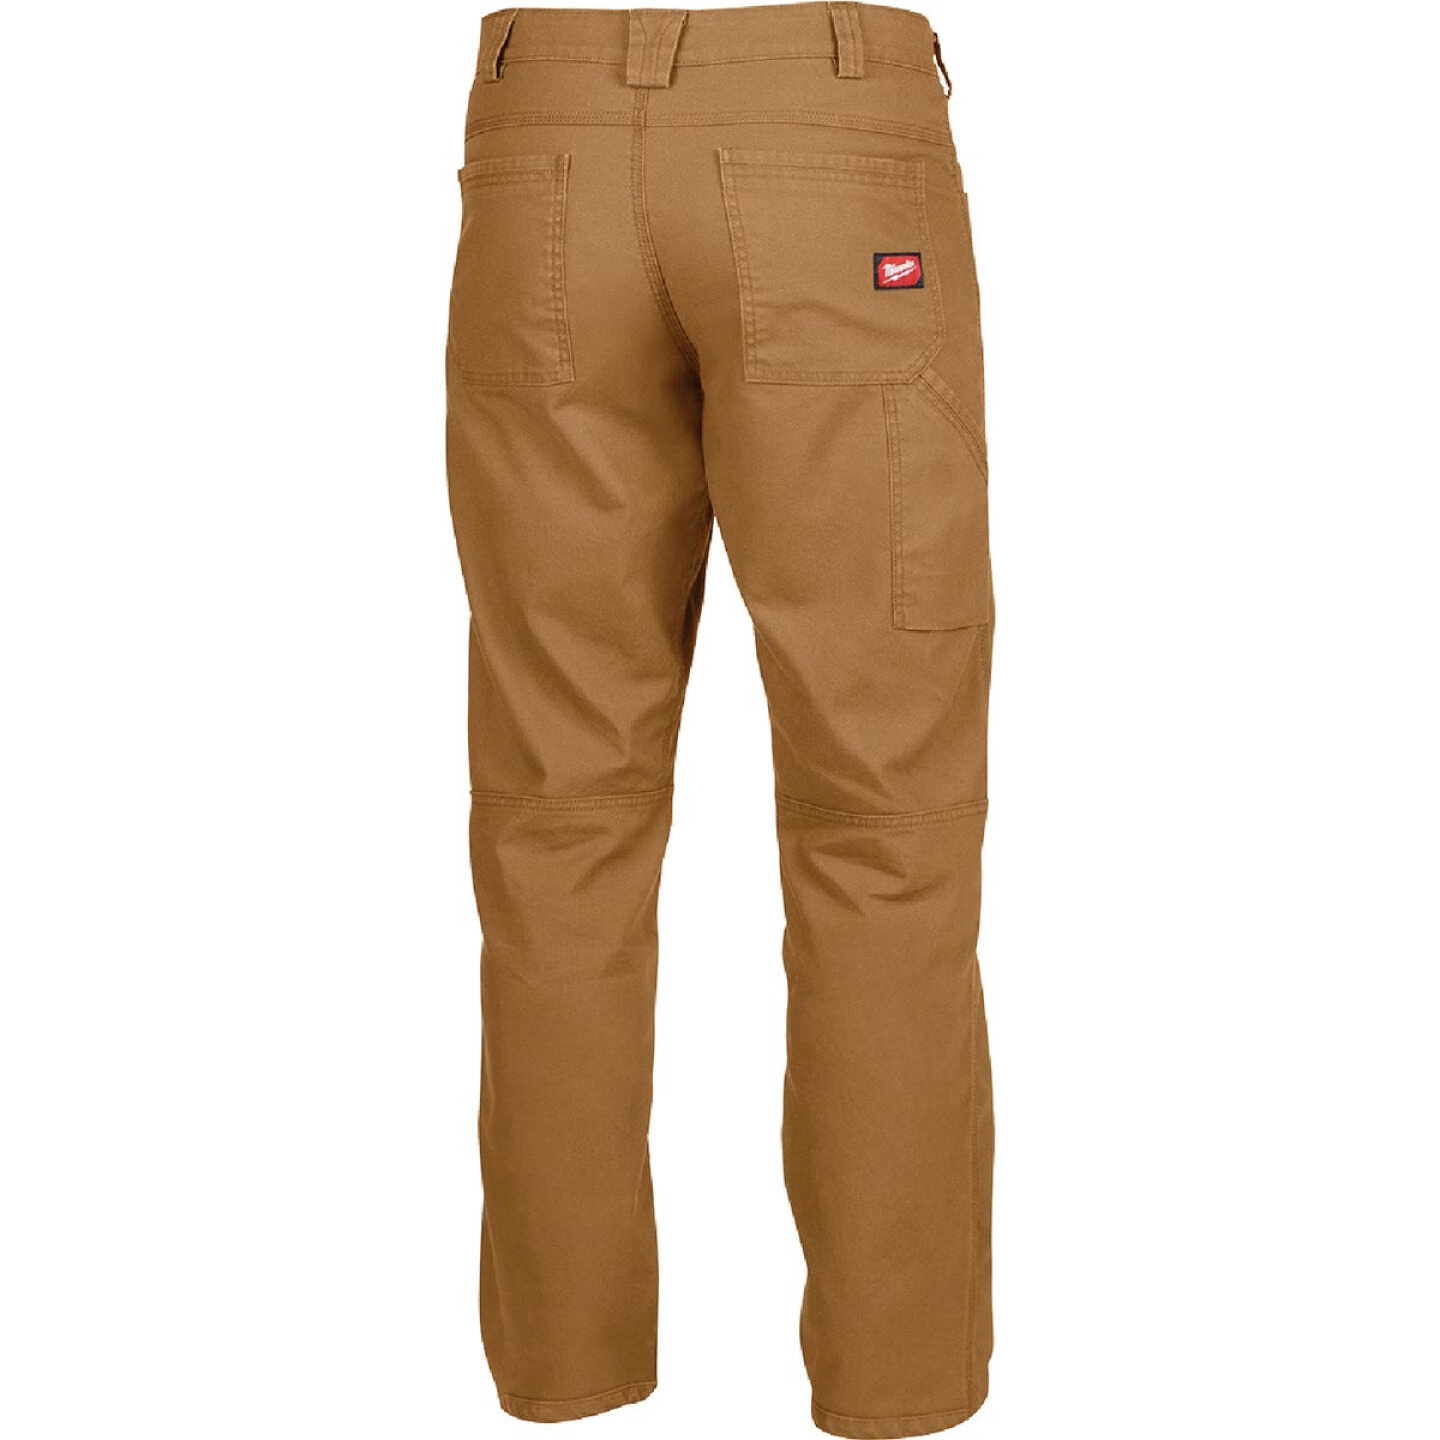 Men's 38 in. x 30 in. Gray Cotton/Polyester/Spandex Flex Work Pants with 6  Pockets